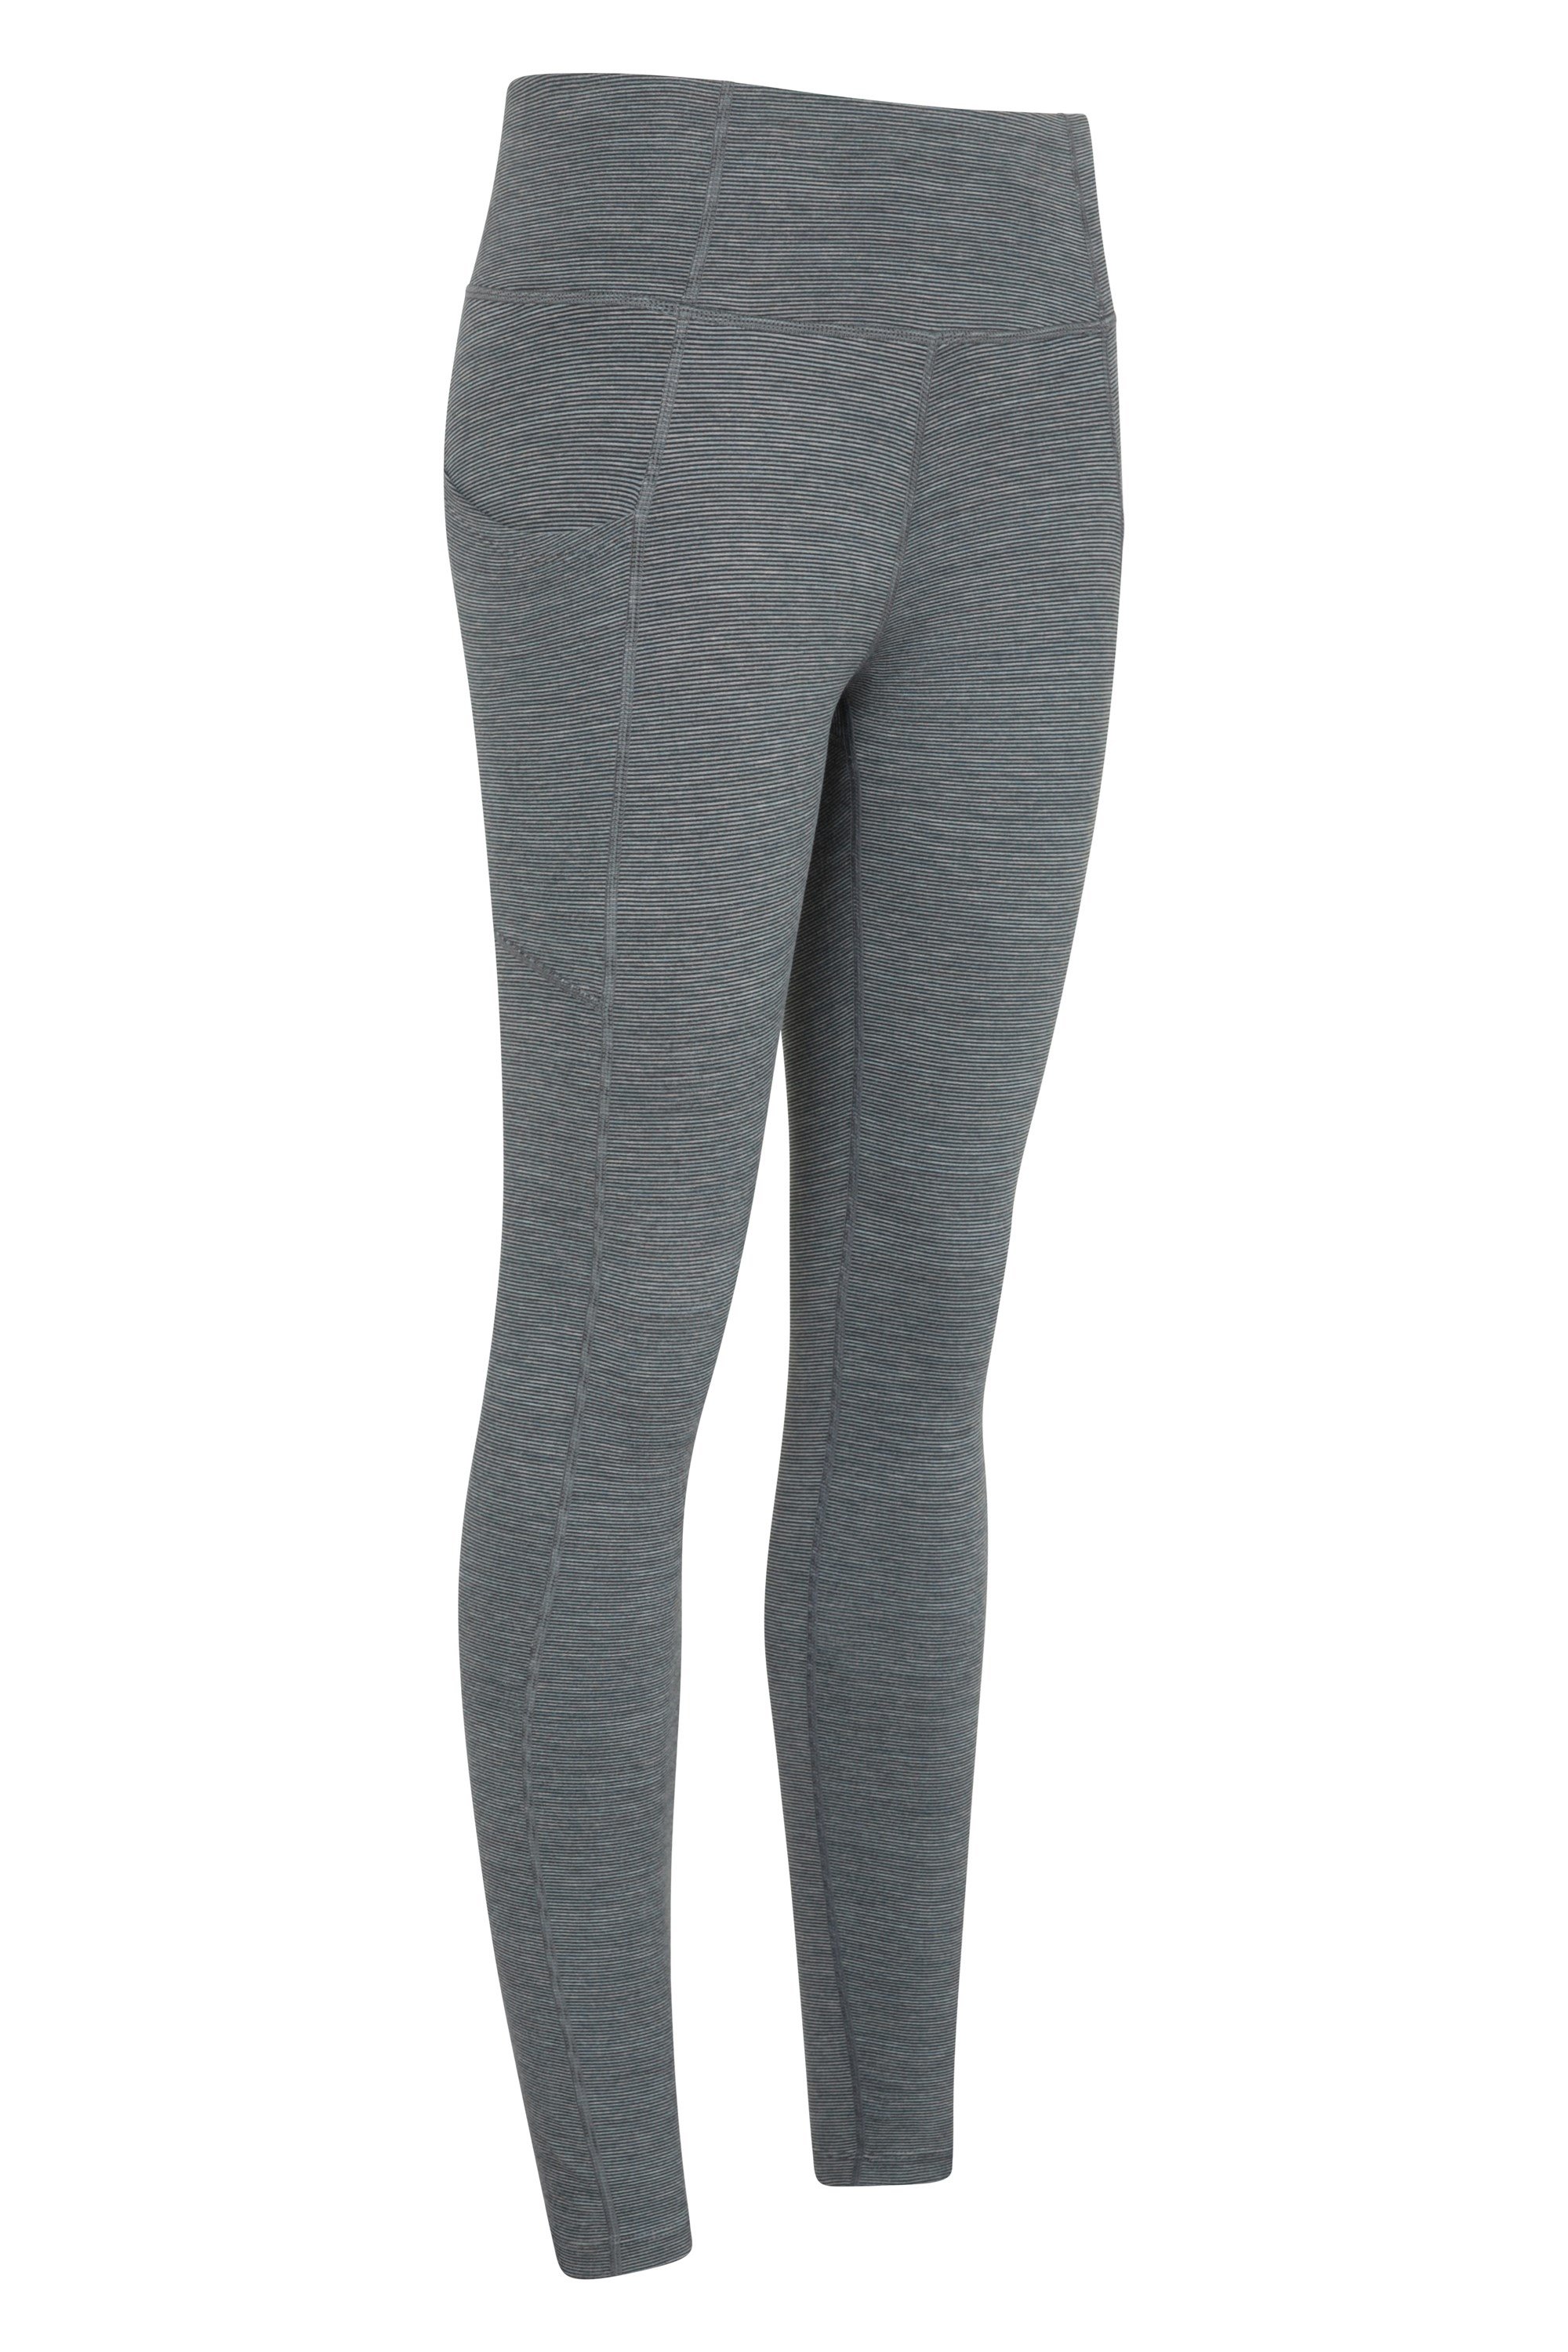  Twin Birds Women's Buttery Soft High Waisted Yoga Pants Full  Length Leggings(Anthrazite Grey, Small) : Clothing, Shoes & Jewelry